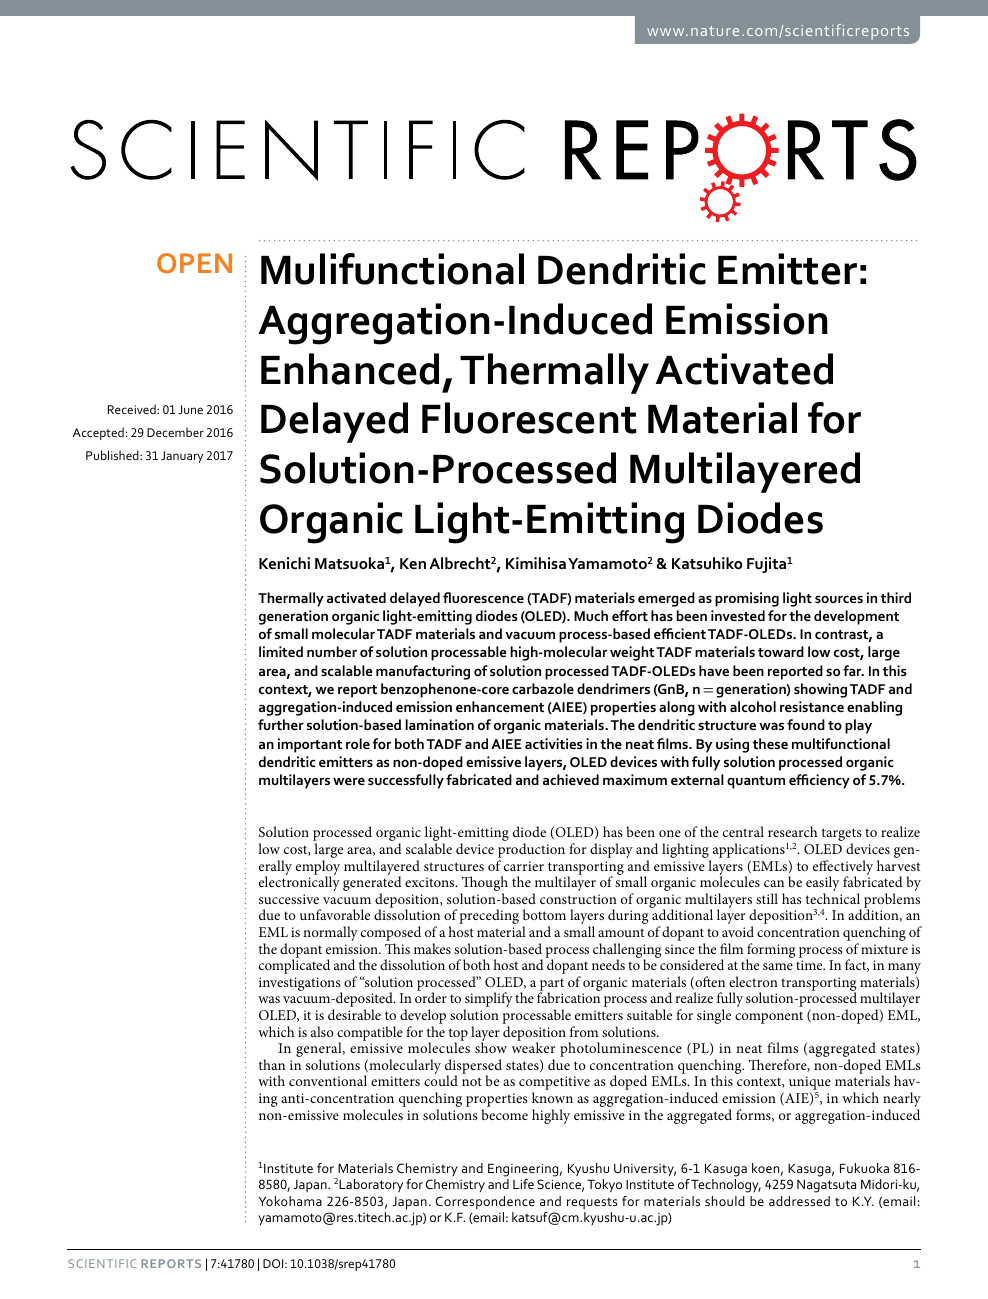 Mulifunctional Dendritic Emitter: Aggregation-Induced